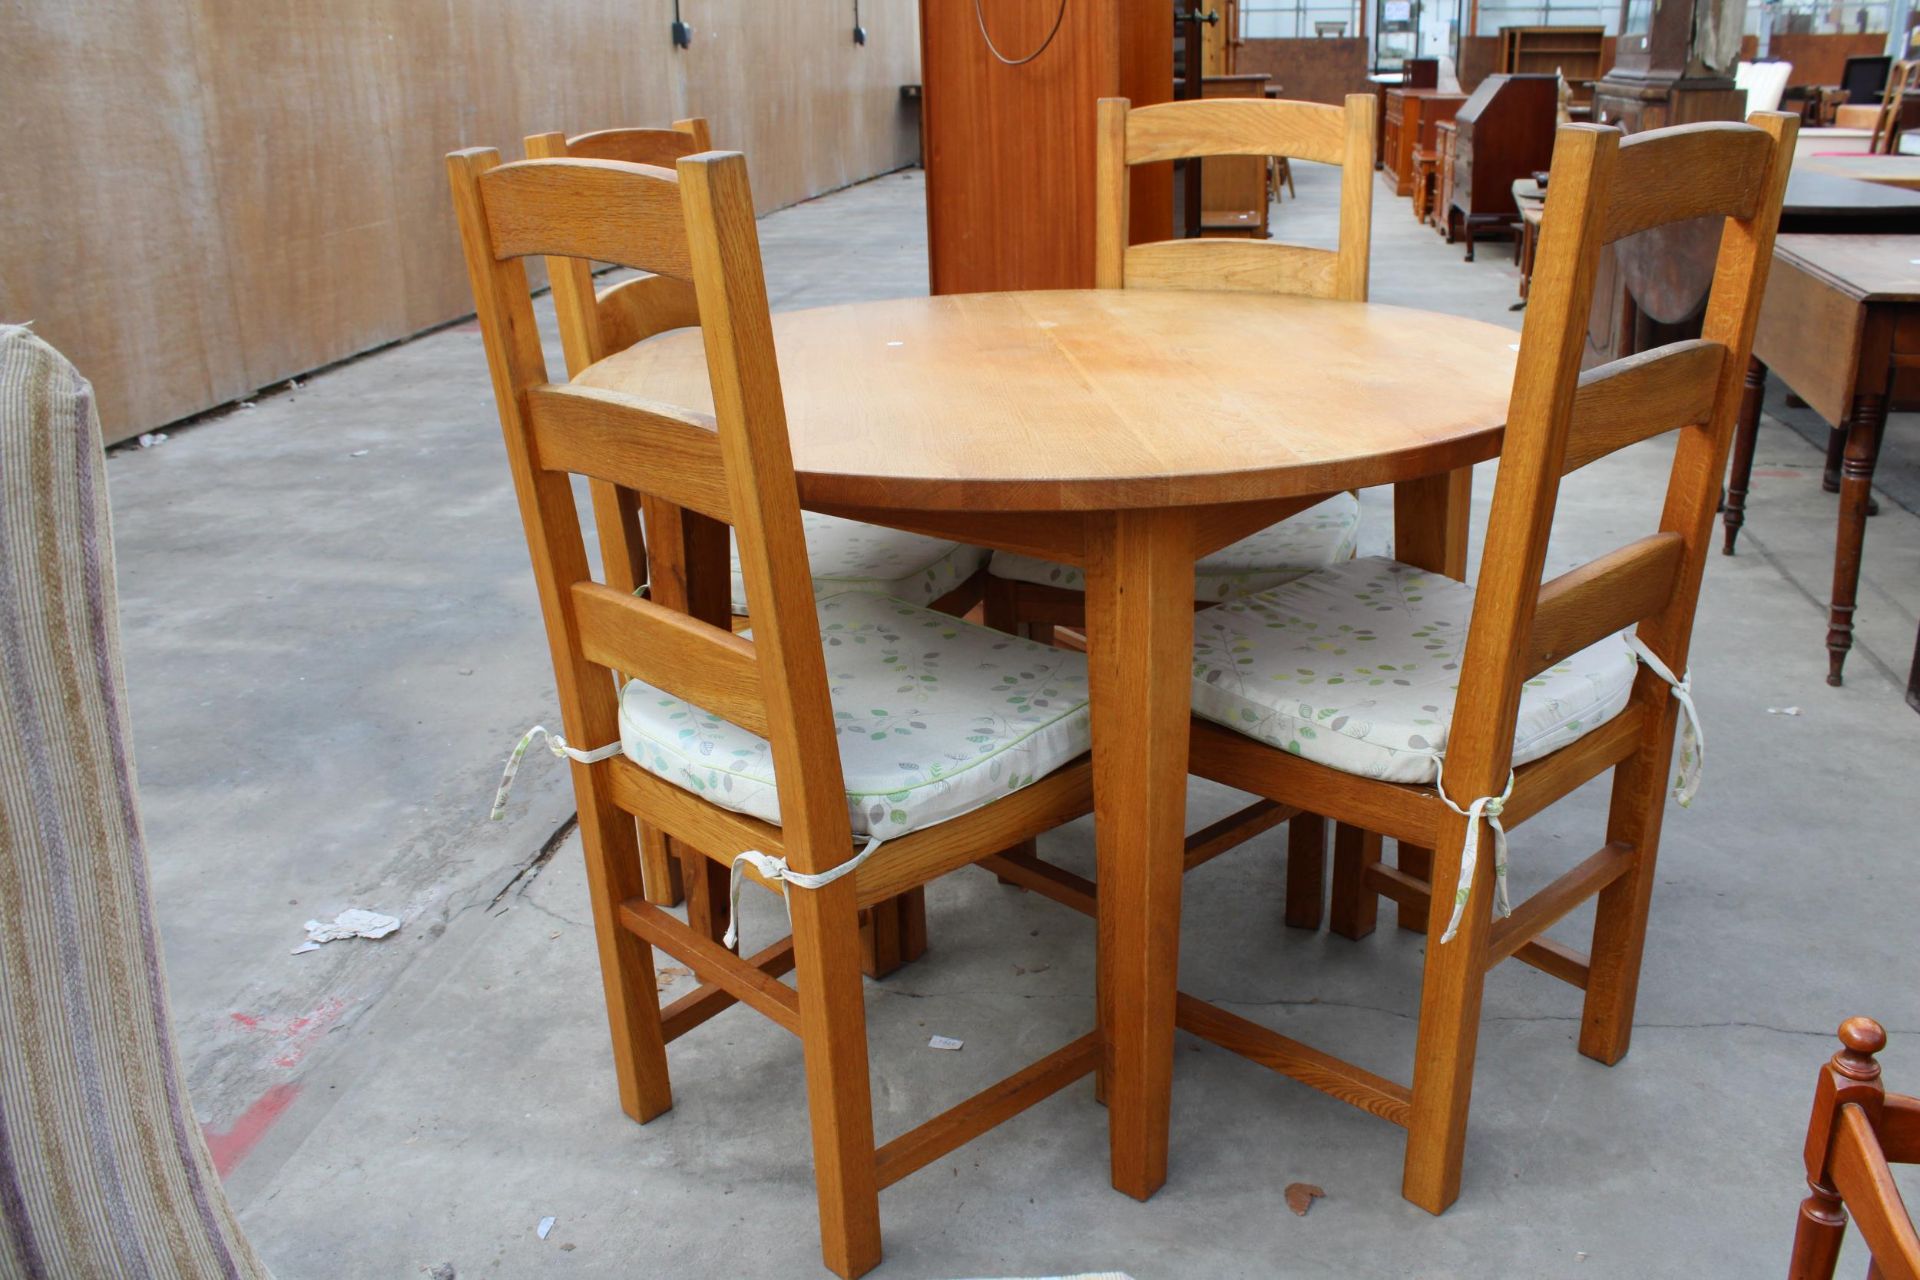 A CIRCULAR OAK DINING TABLE, WITH FOUR OAK LADDER BACK DINING CHAIRS WITH RUSH SEATS, DIAMETER 111CM - Image 2 of 3